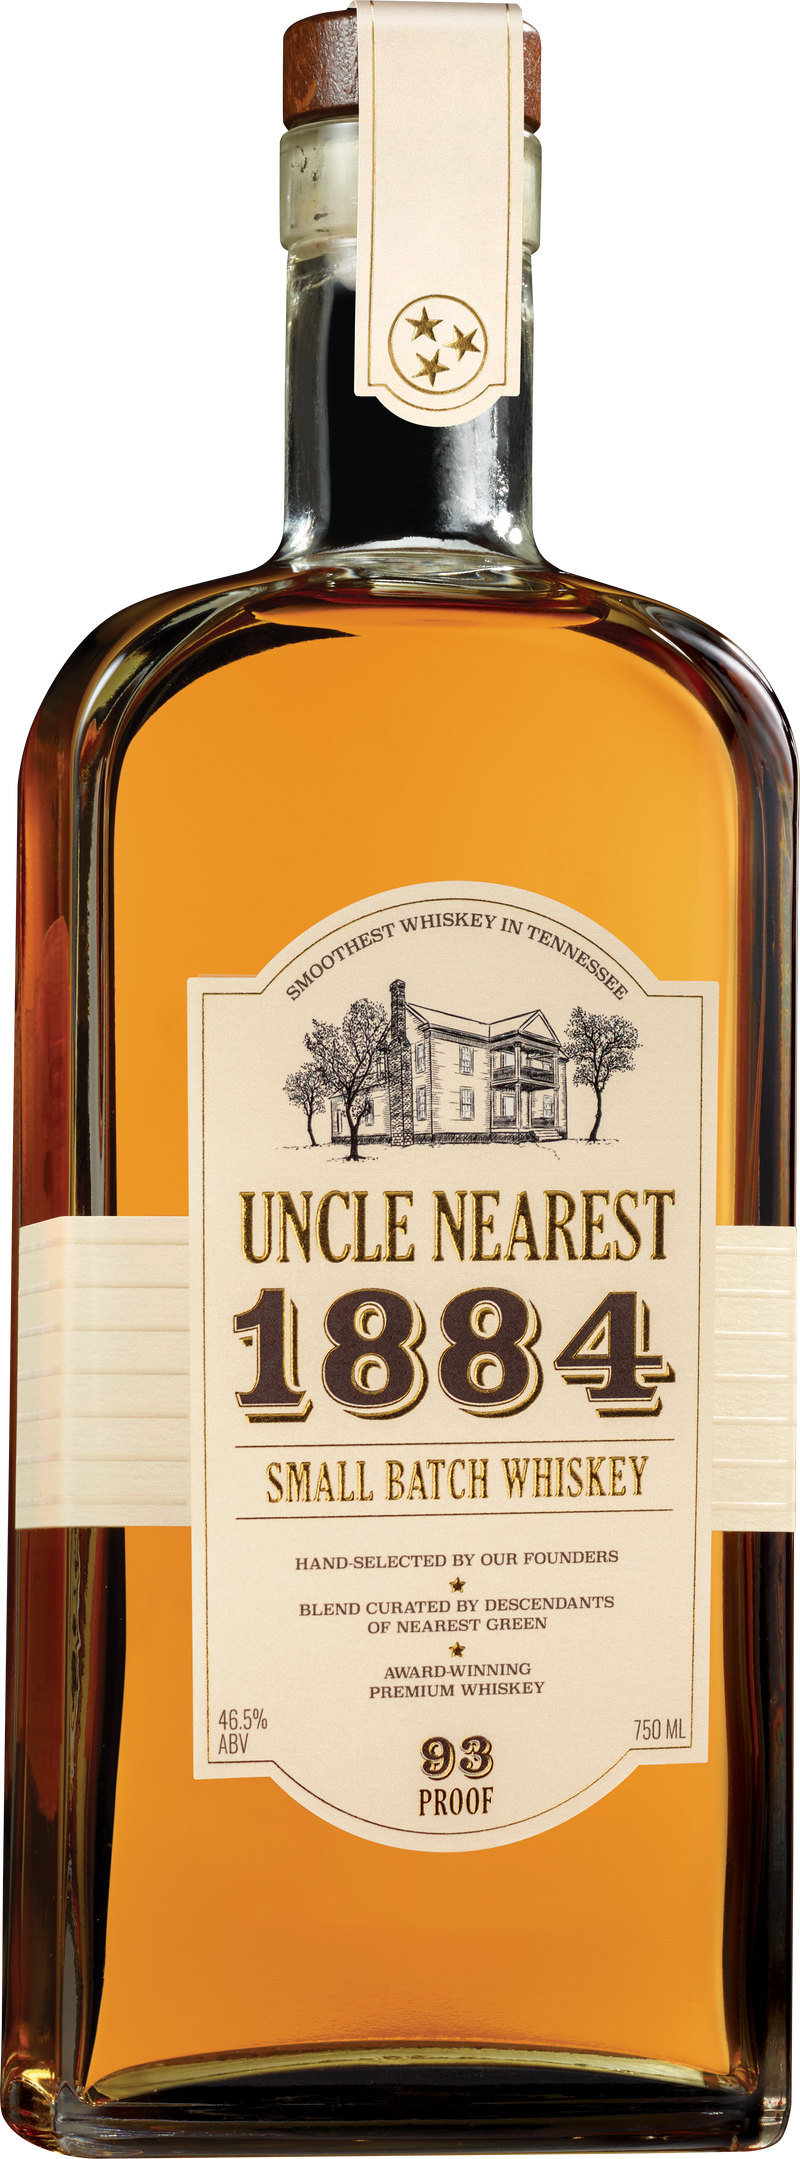 UNCLE NEAREST 1884 SMALL BATCH American Whiskey BeverageWarehouse